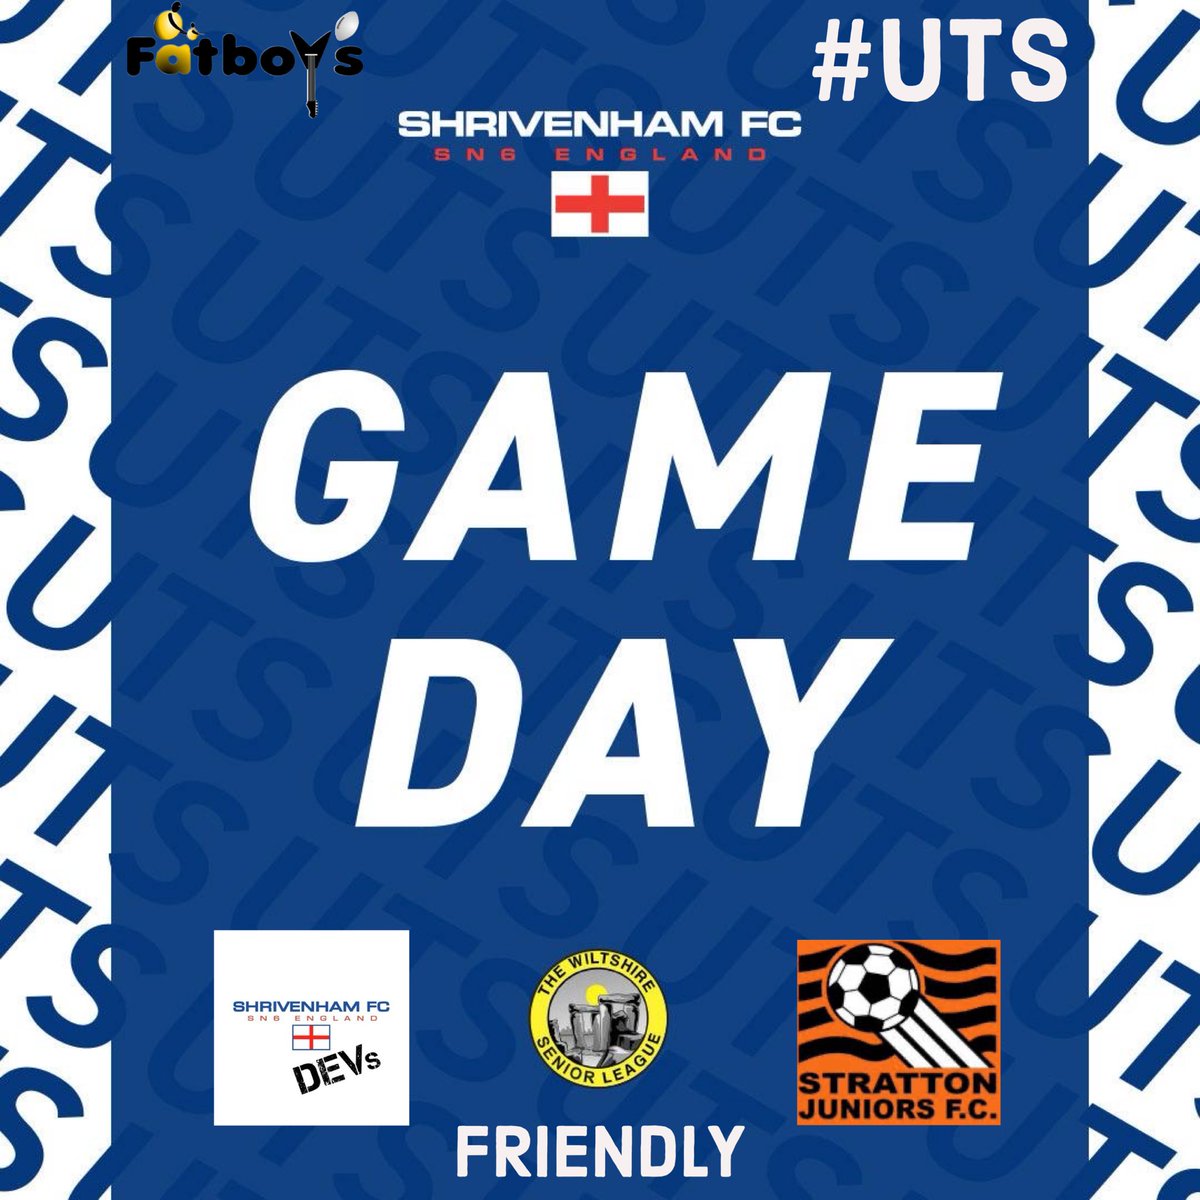 🔵⚪️GAME DAY🔵⚪️ With no league game this weekend, the boys are in action this evening for a friendly against @StrattonJuniors 🆚 @StrattonJuniors 🏆 Friendly ⌚️ 18:30 📍Addison Crescent,Upper Stratton, Swindon, SN2 7JX #UTS @WiltsLeague @OxOnFootball @YSswindon